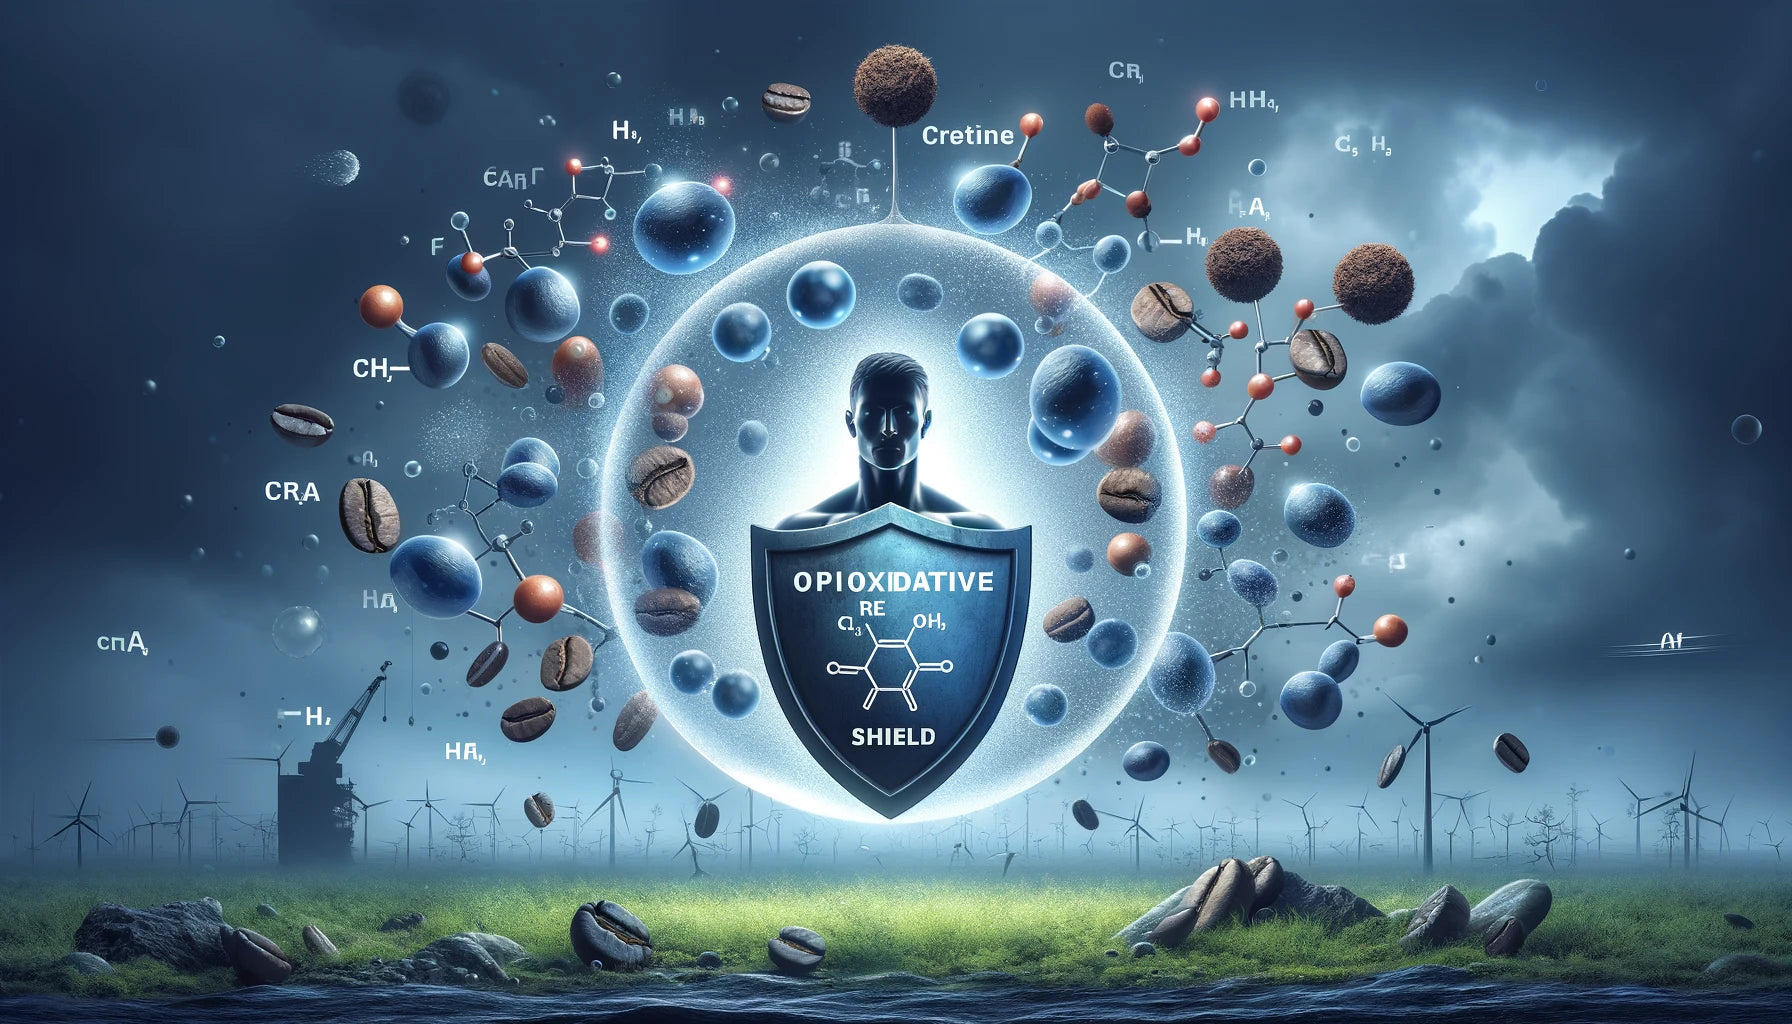 Oxidative Shield - A human silhouette surrounded by a protective bubble against a backdrop of oxidative stress elements: pollution, free radicals.